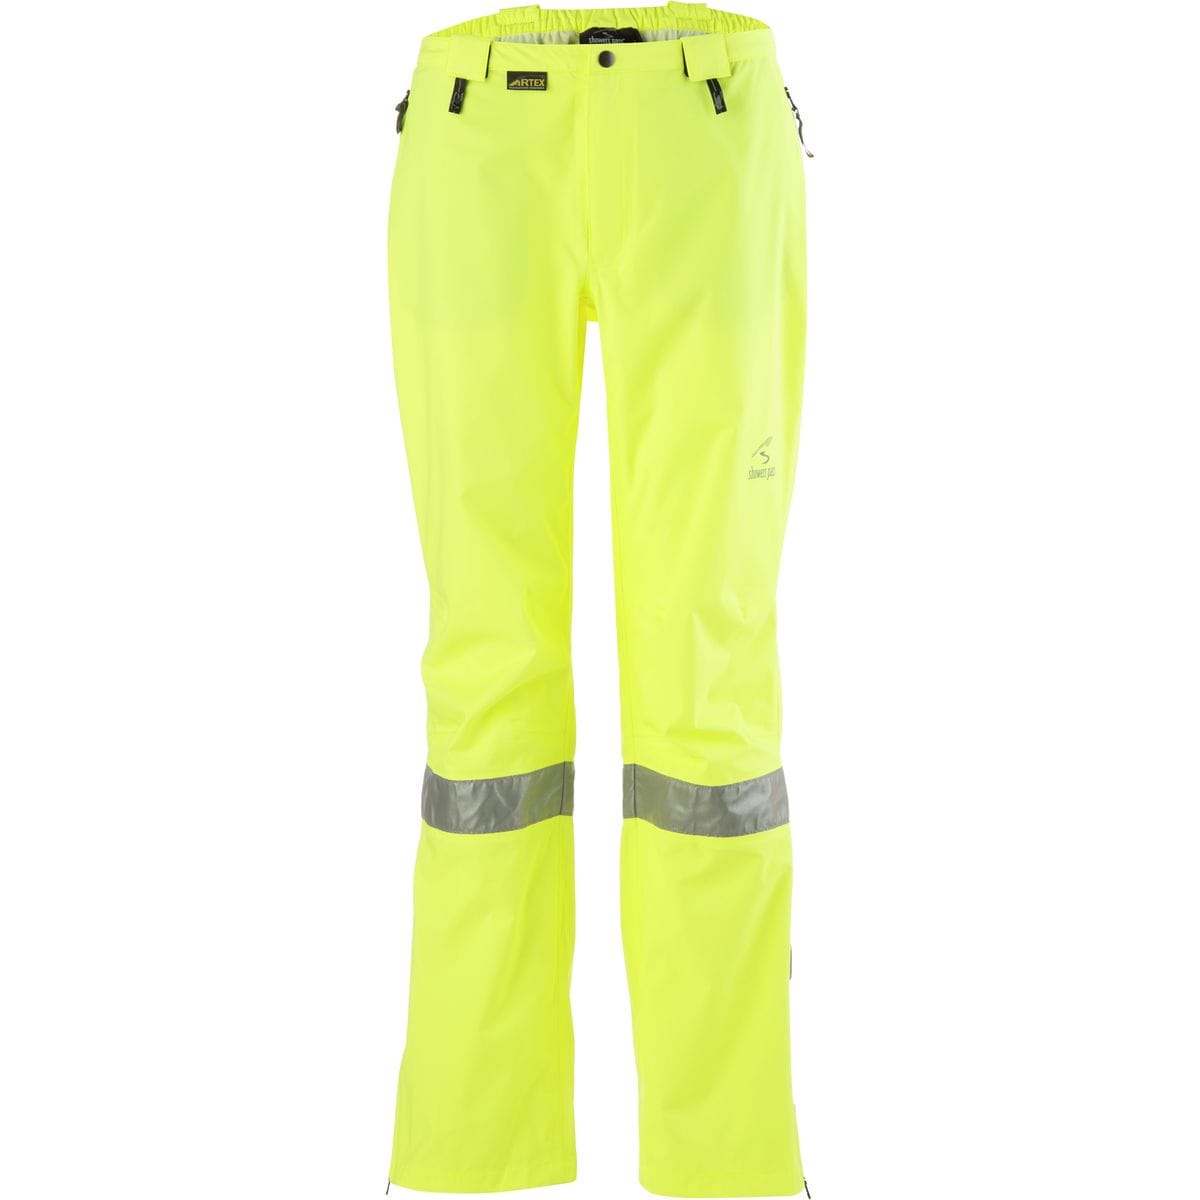 Showers Pass Club Visible Pant Womens